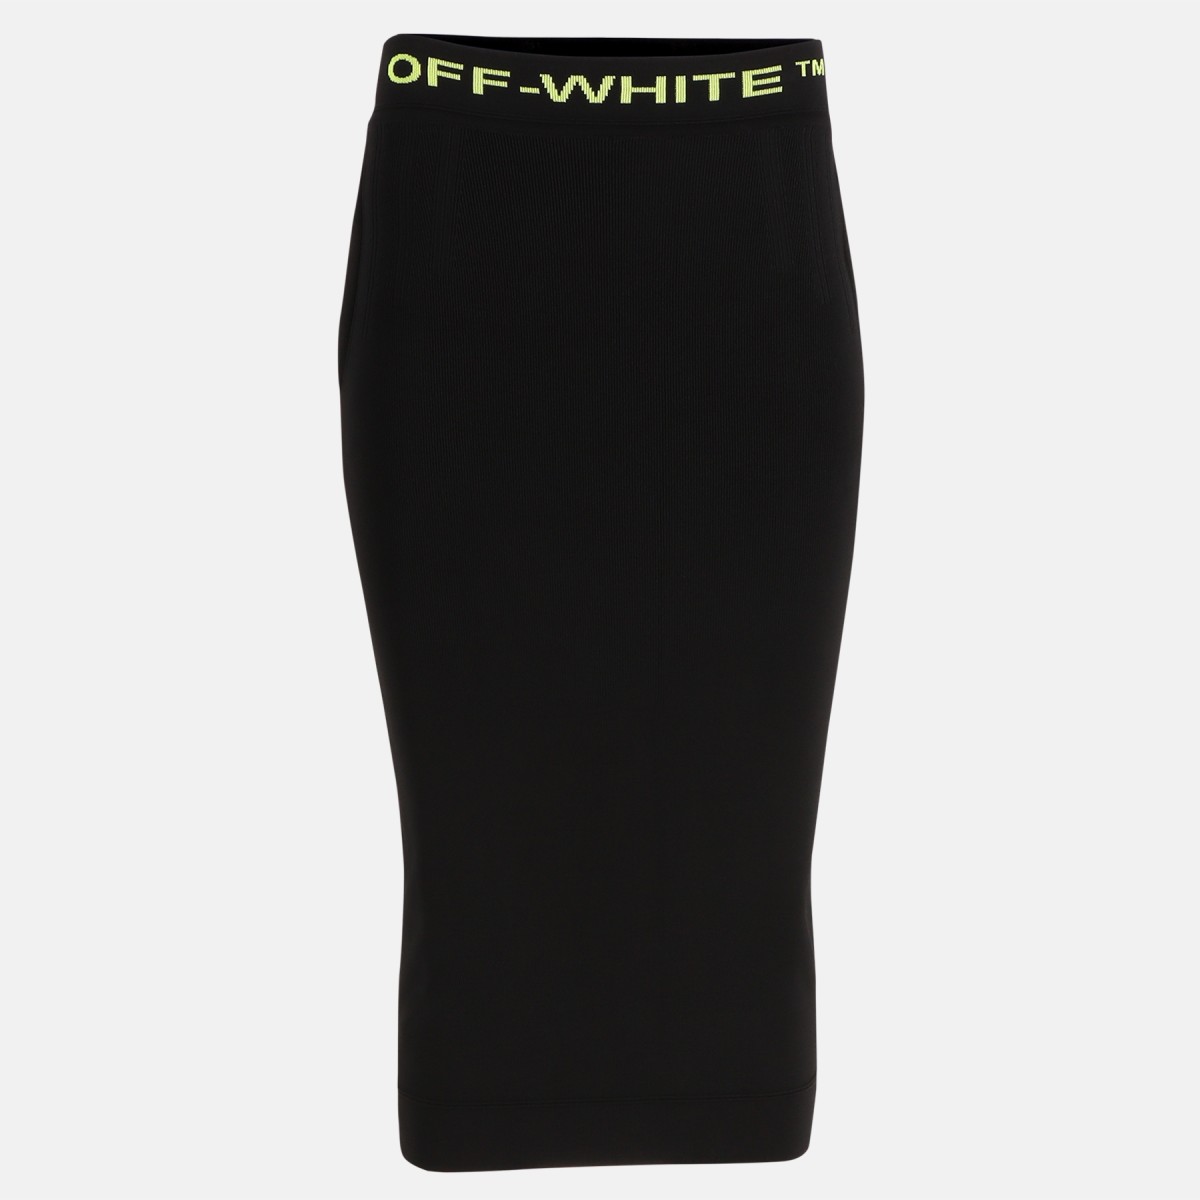 Rock Off-White - - Outlet